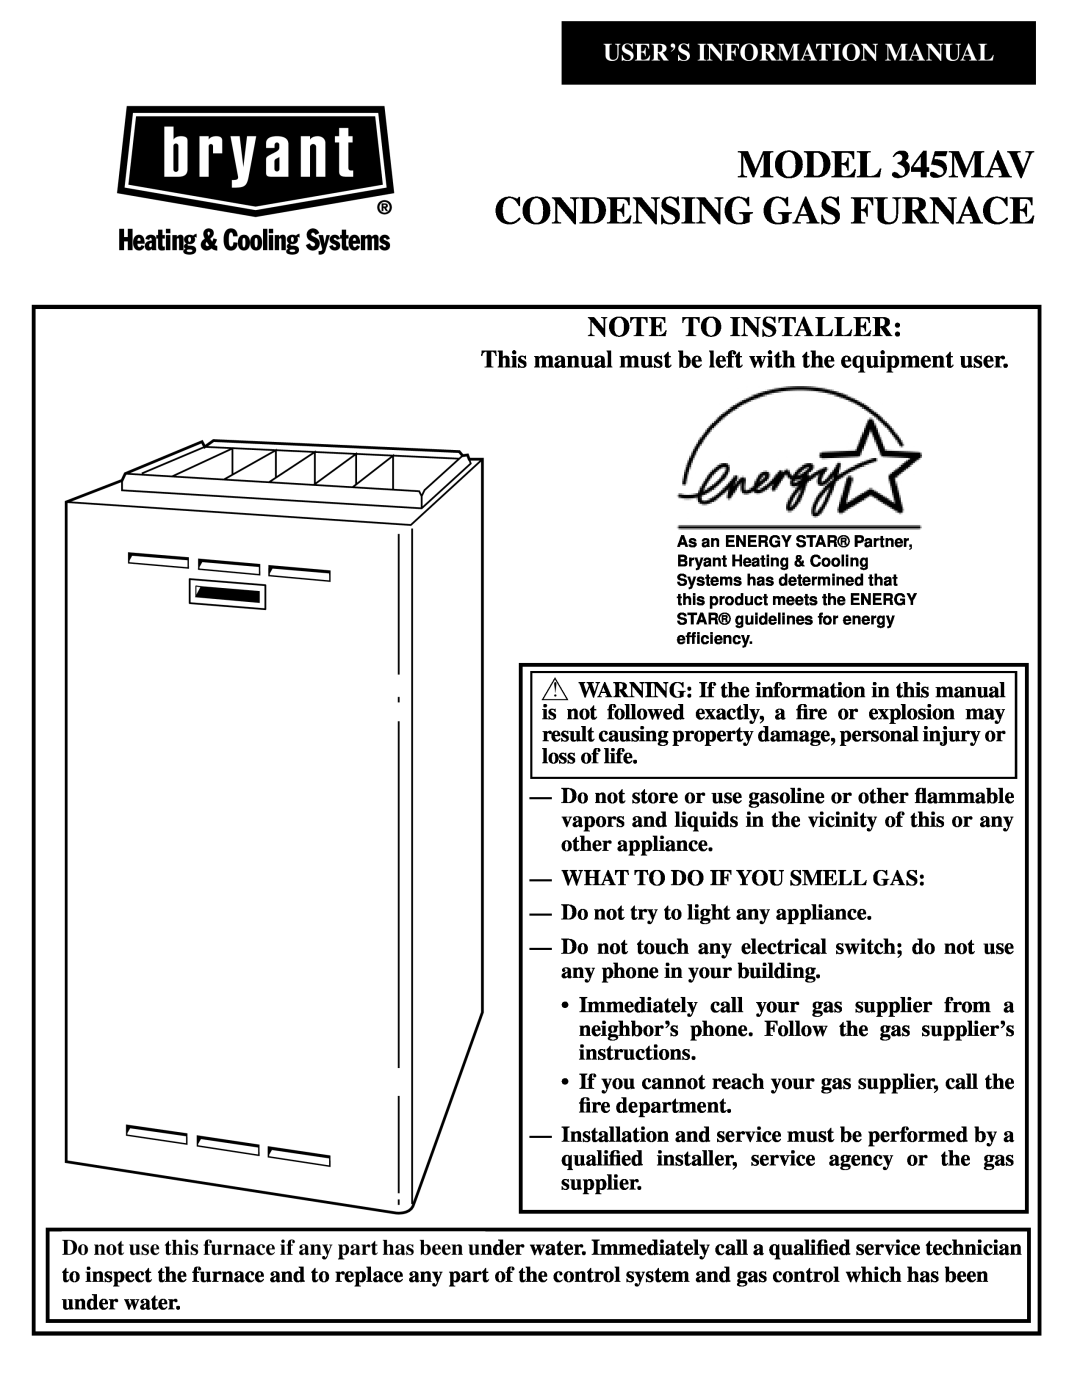 Bryant manual This manual must be left with the equipment user, MODEL 345MAV CONDENSING GAS FURNACE, Note To Installer 